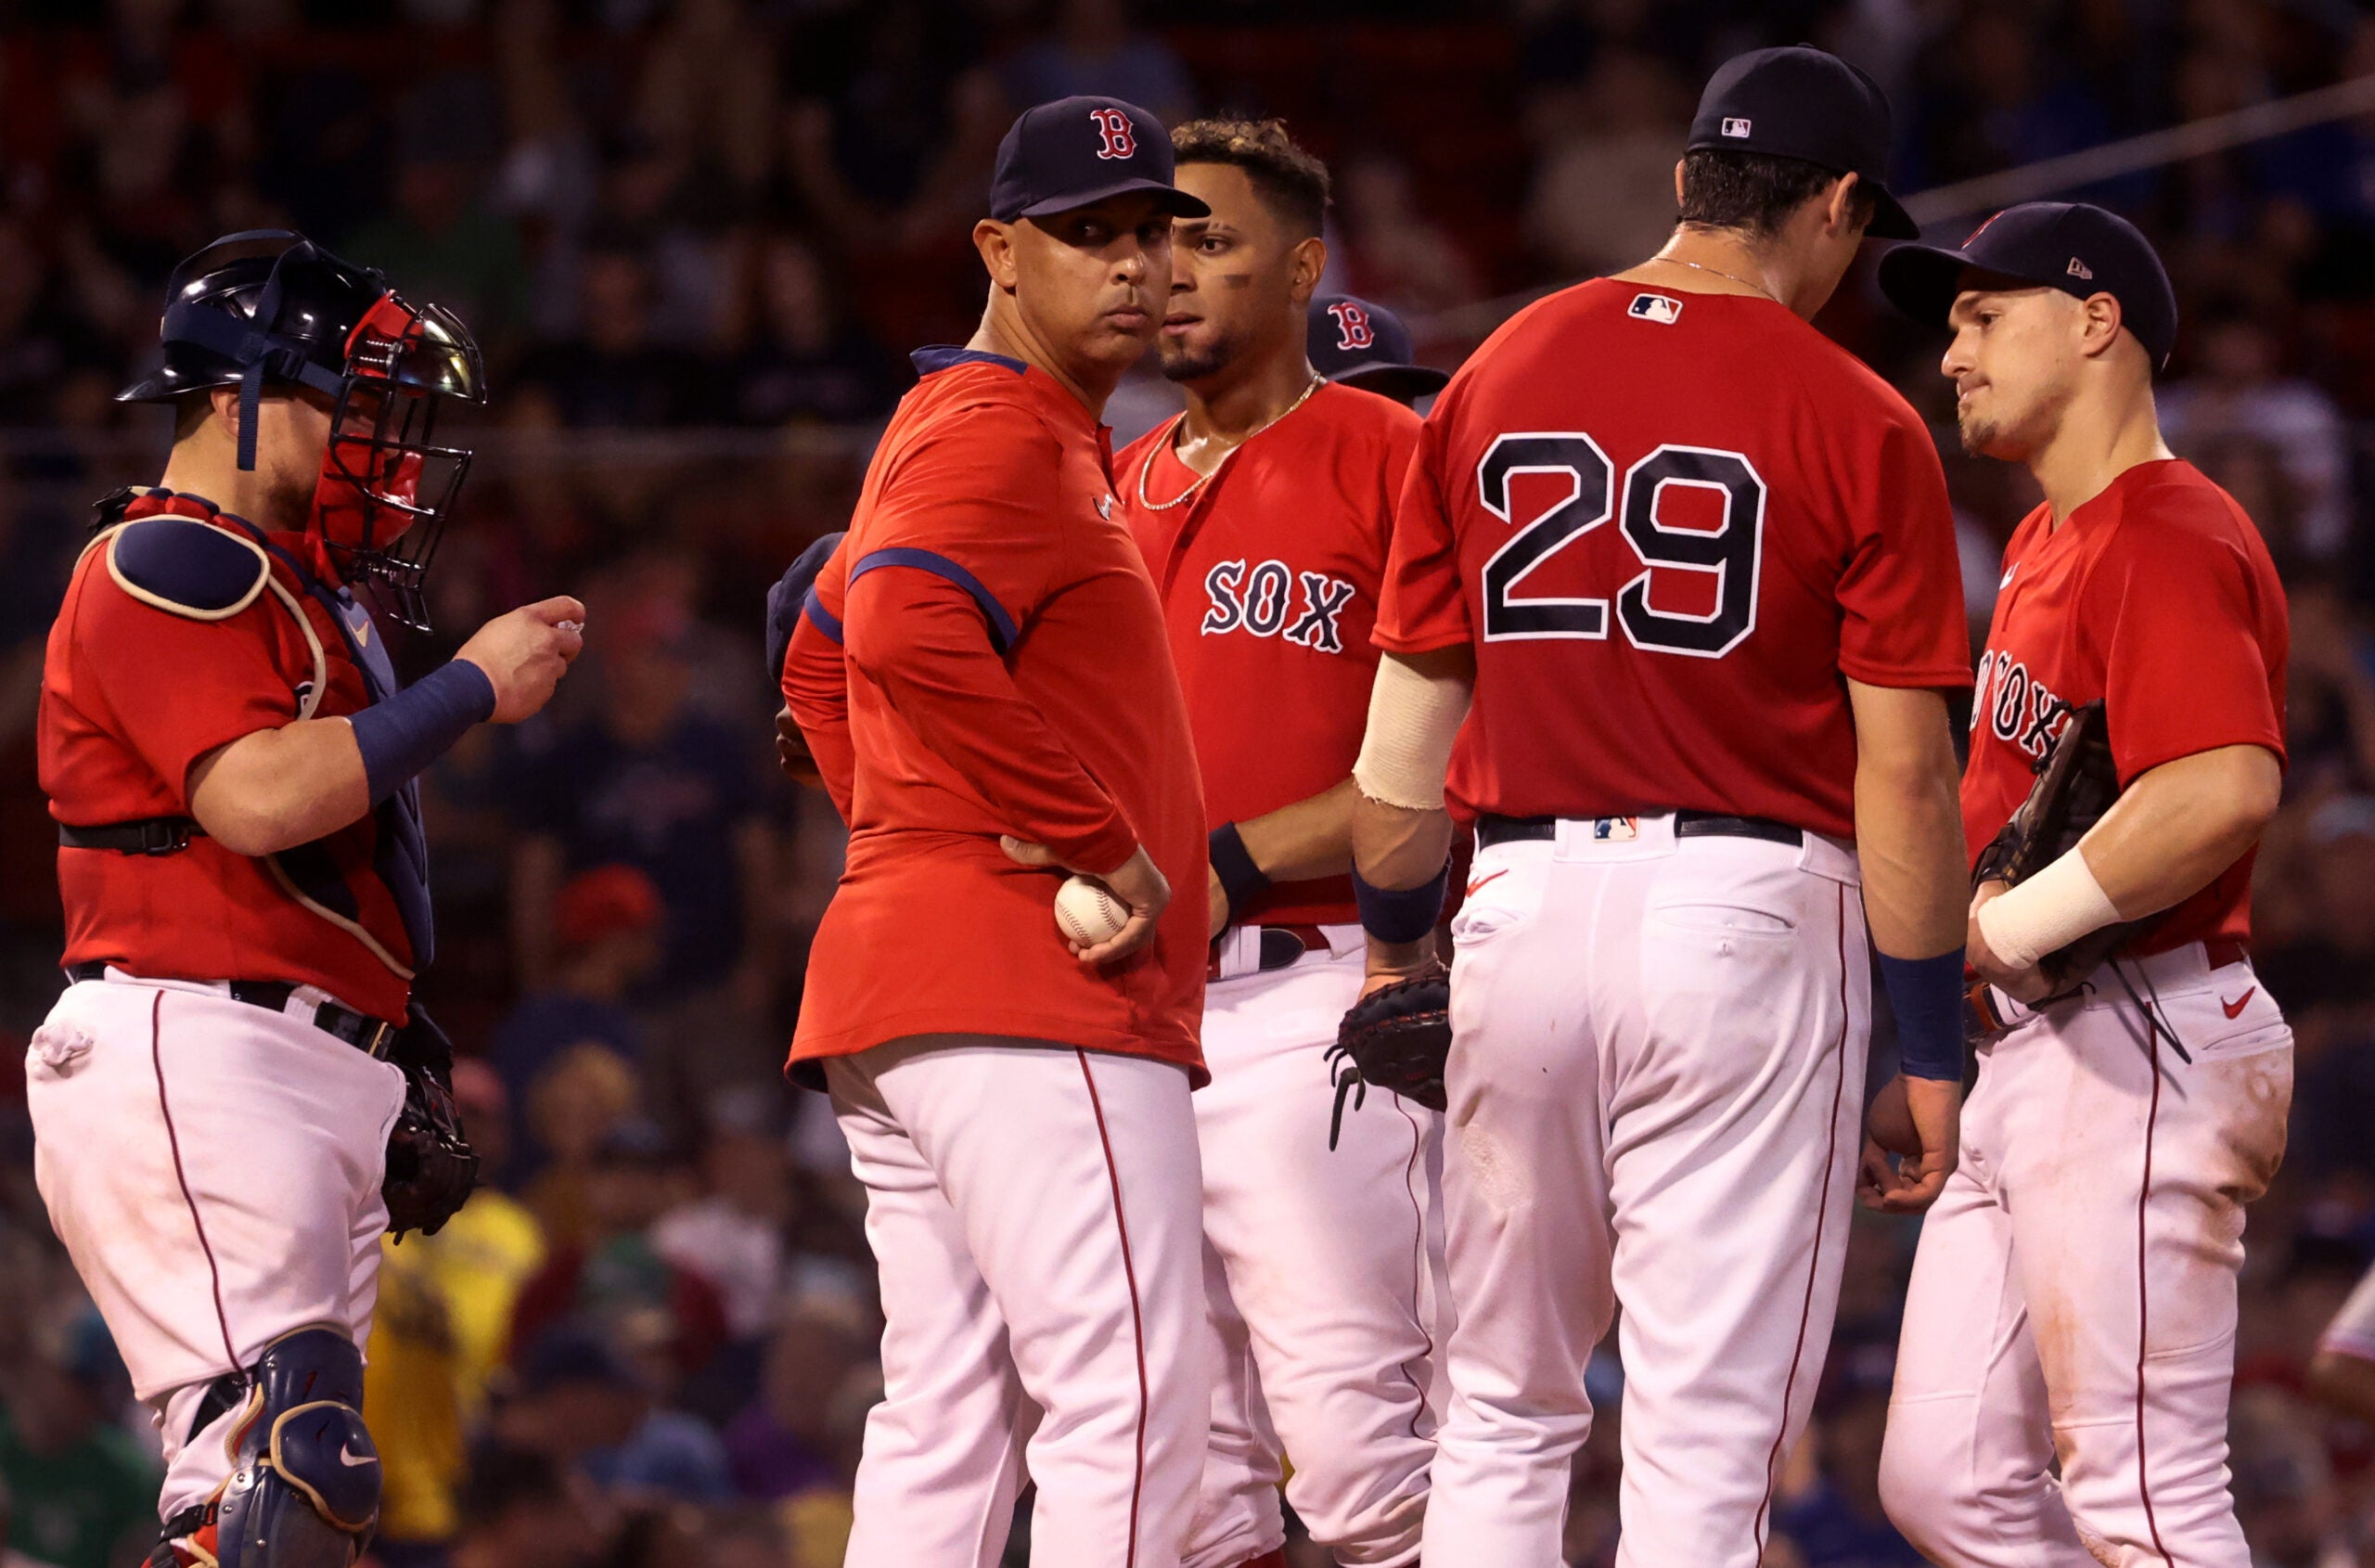 Cora sits Verdugo before Red Sox loss, takes 'responsibility